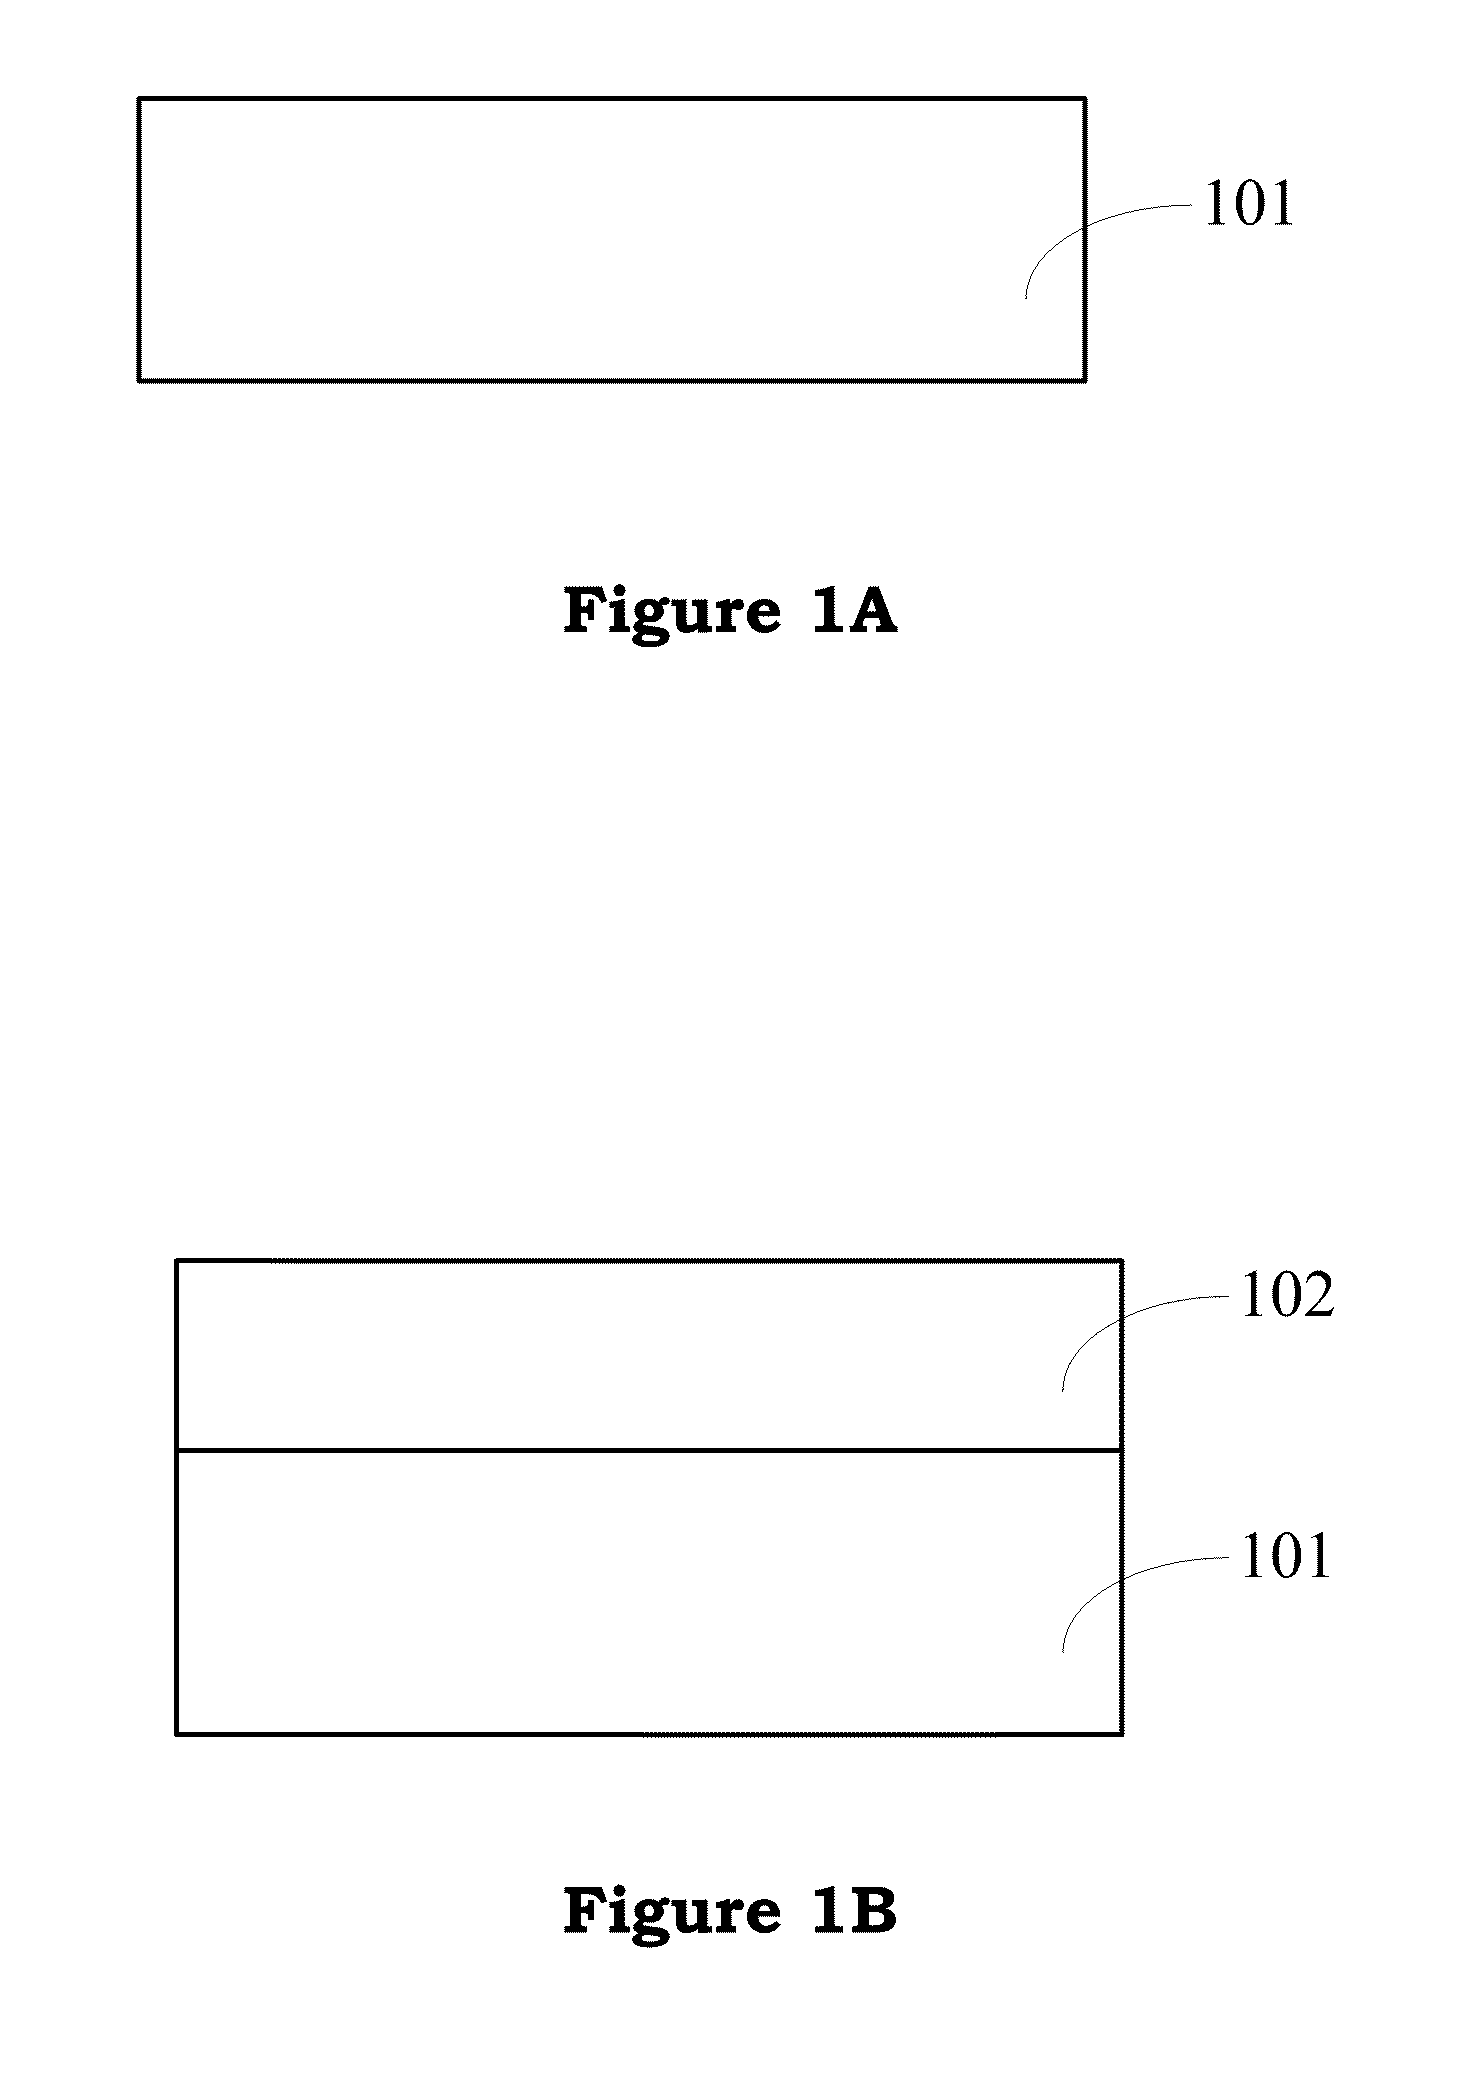 Method for forming an interfacial passivation layer on the Ge semiconductor